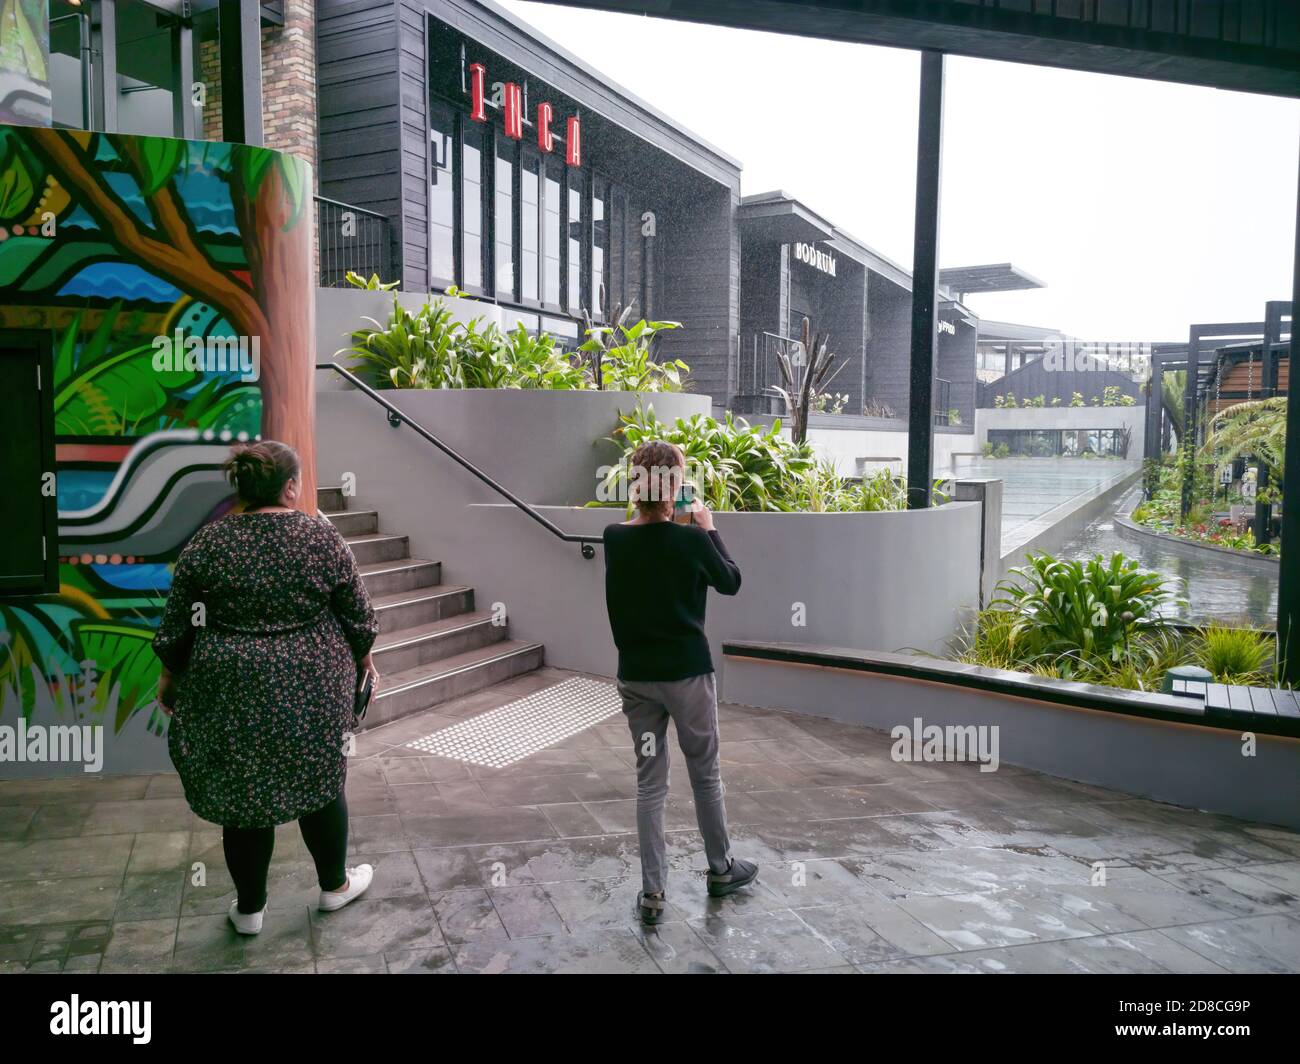 AUCKLAND, NEW ZEALAND - Oct 10, 2019: View of people photographing rooftop dining and entertainment precinct terrace in Westfield Newmarket Shopping C Stock Photo